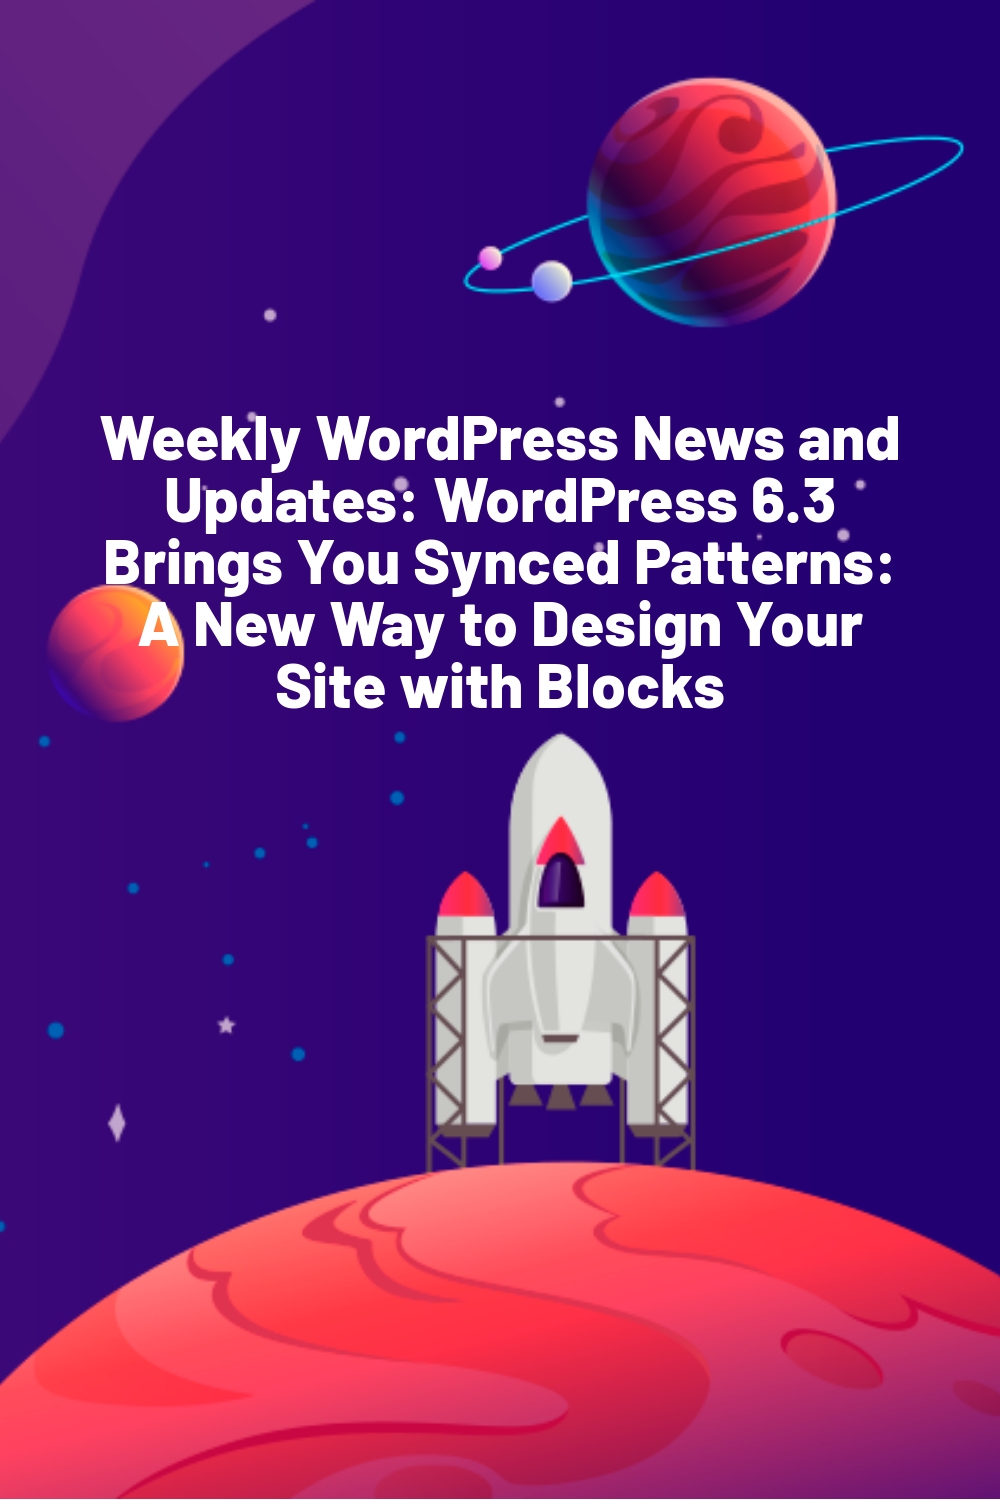 Weekly WordPress News and Updates: WordPress 6.3 Brings You Synced Patterns: A New Way to Design Your Site with Blocks